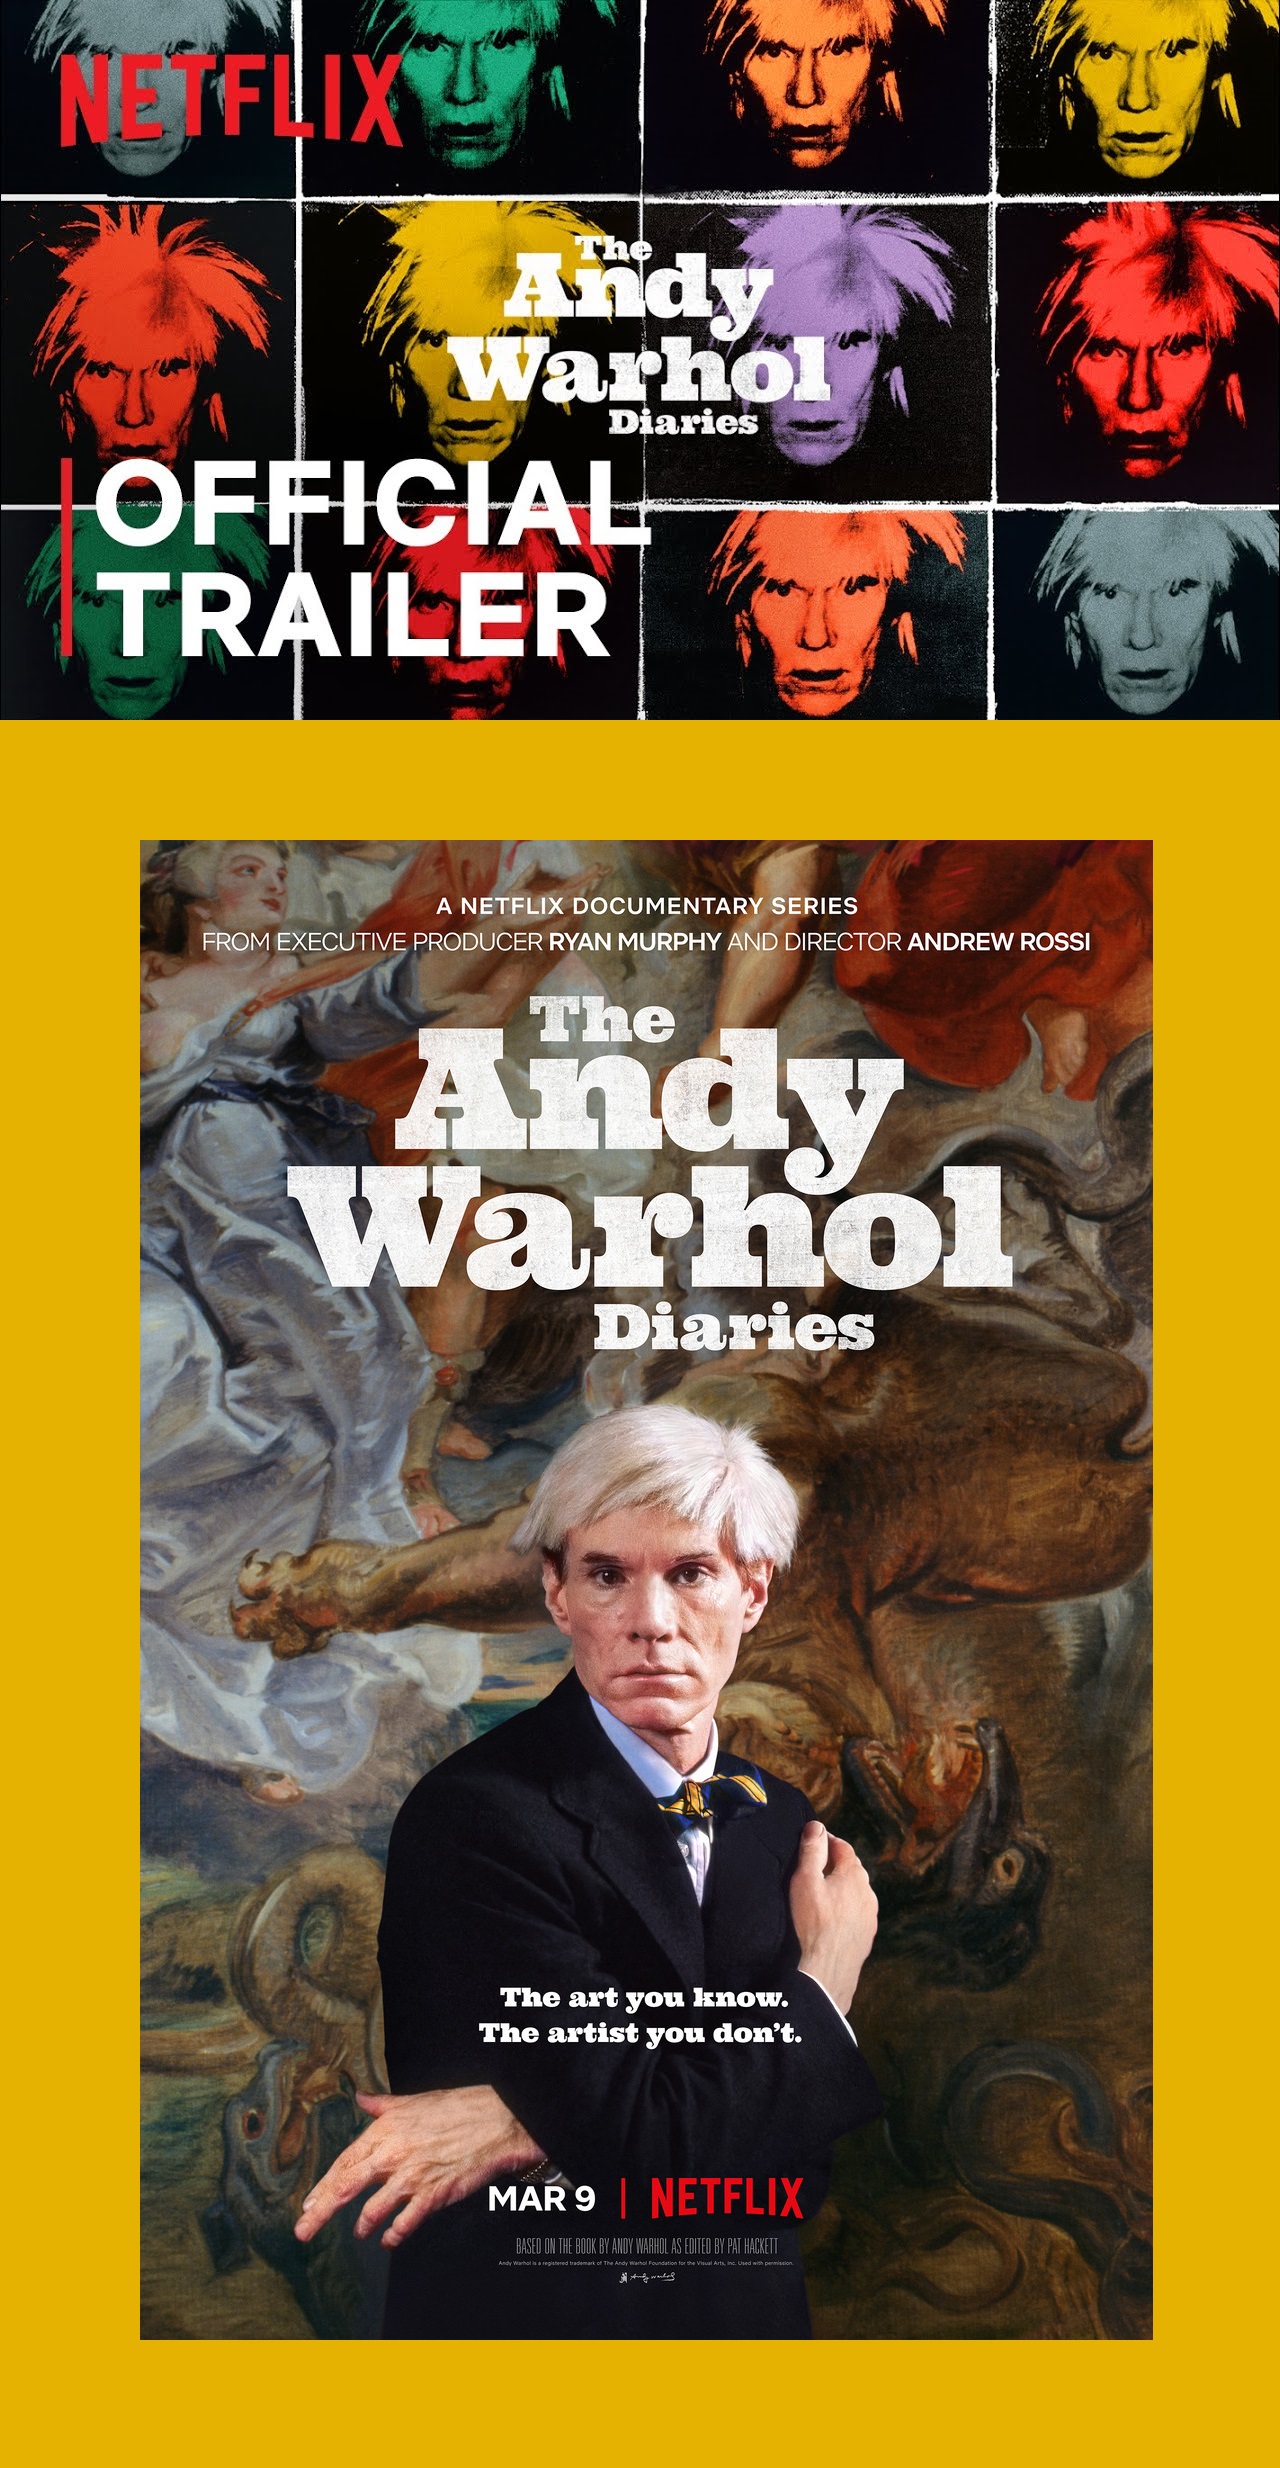 Le Journal d'Andy Warhol (The Andy Warhol Diaries)